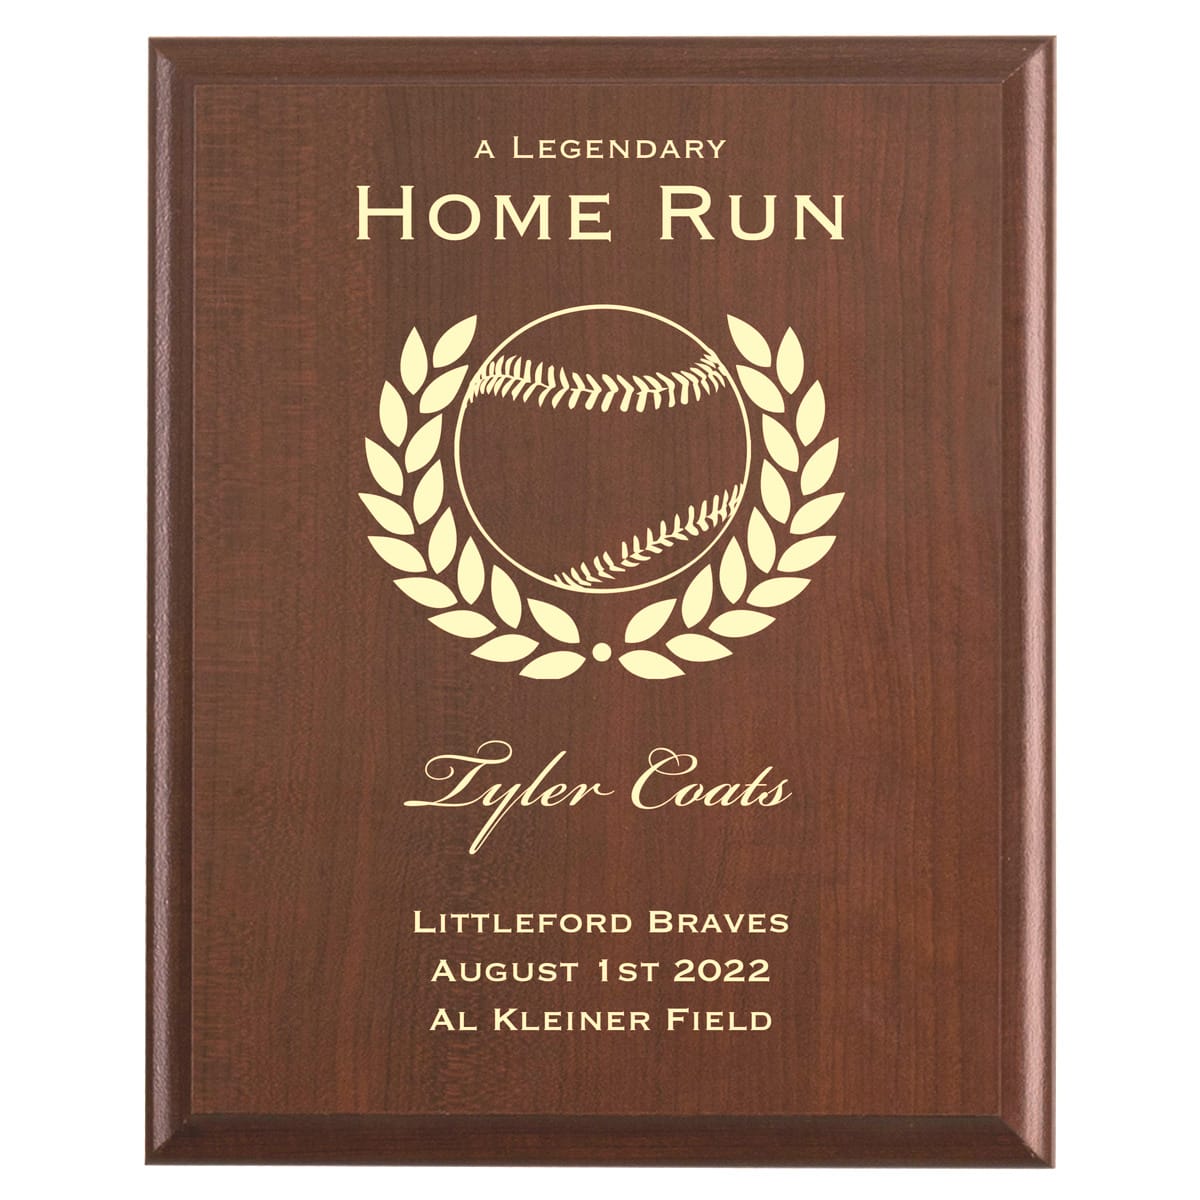 Plaque photo: Home Run Award design with free personalization. Wood style finish with customized text.